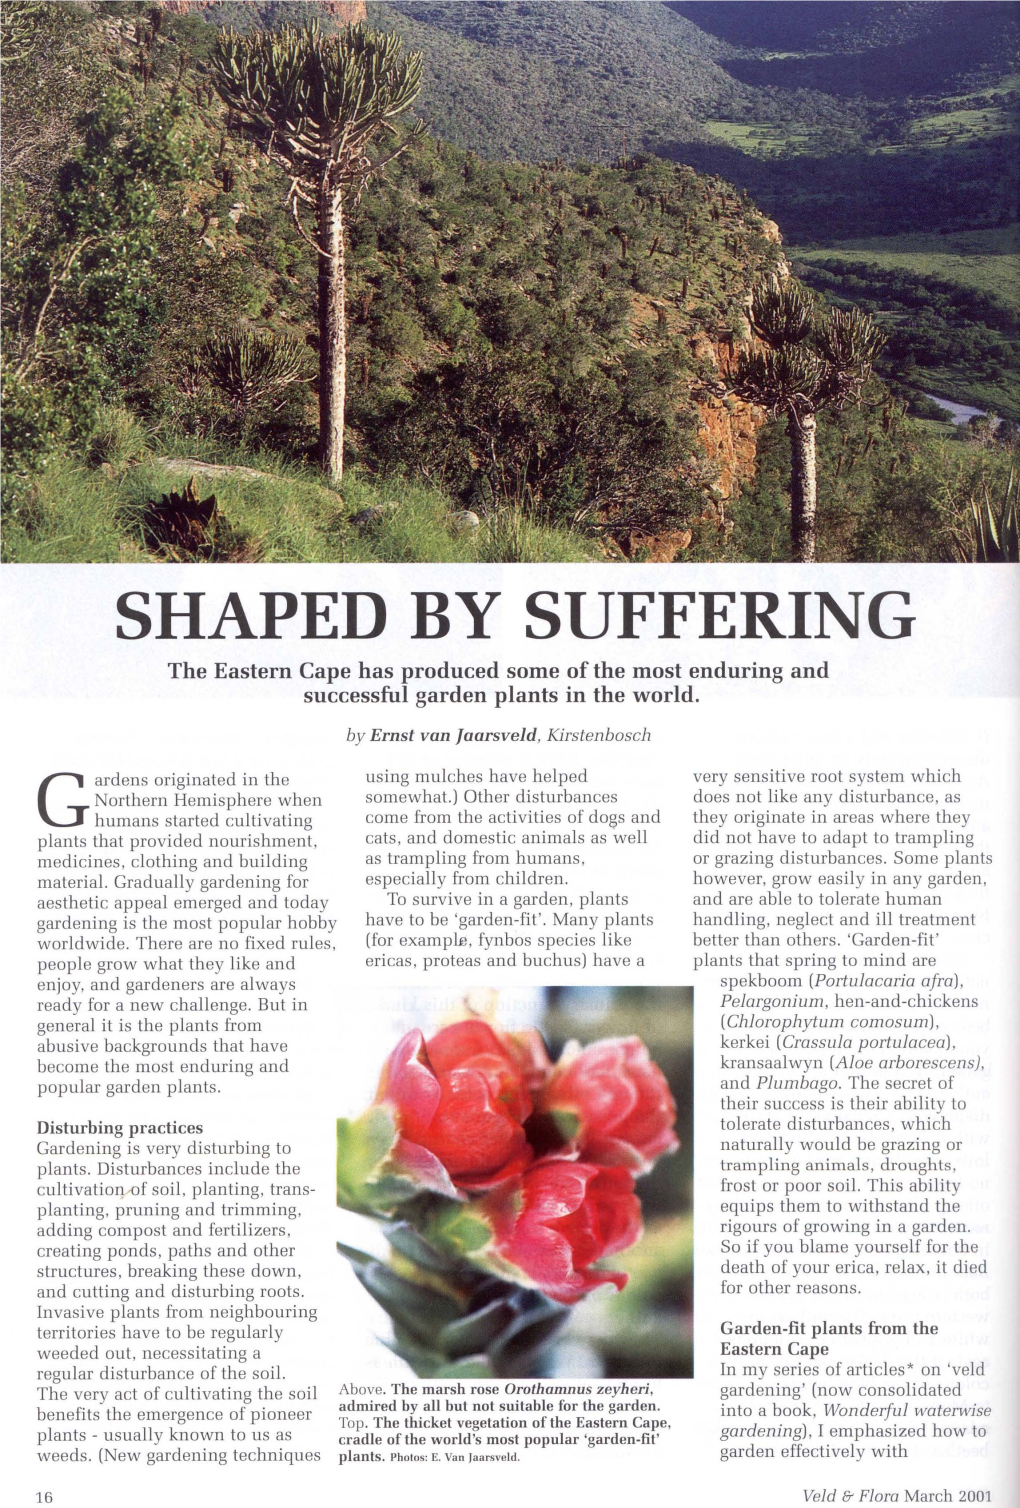 SHAPED by SUFFERING the Eastern Cape Has Produced Some of the Most Enduring and Successful Garden Plants in the World